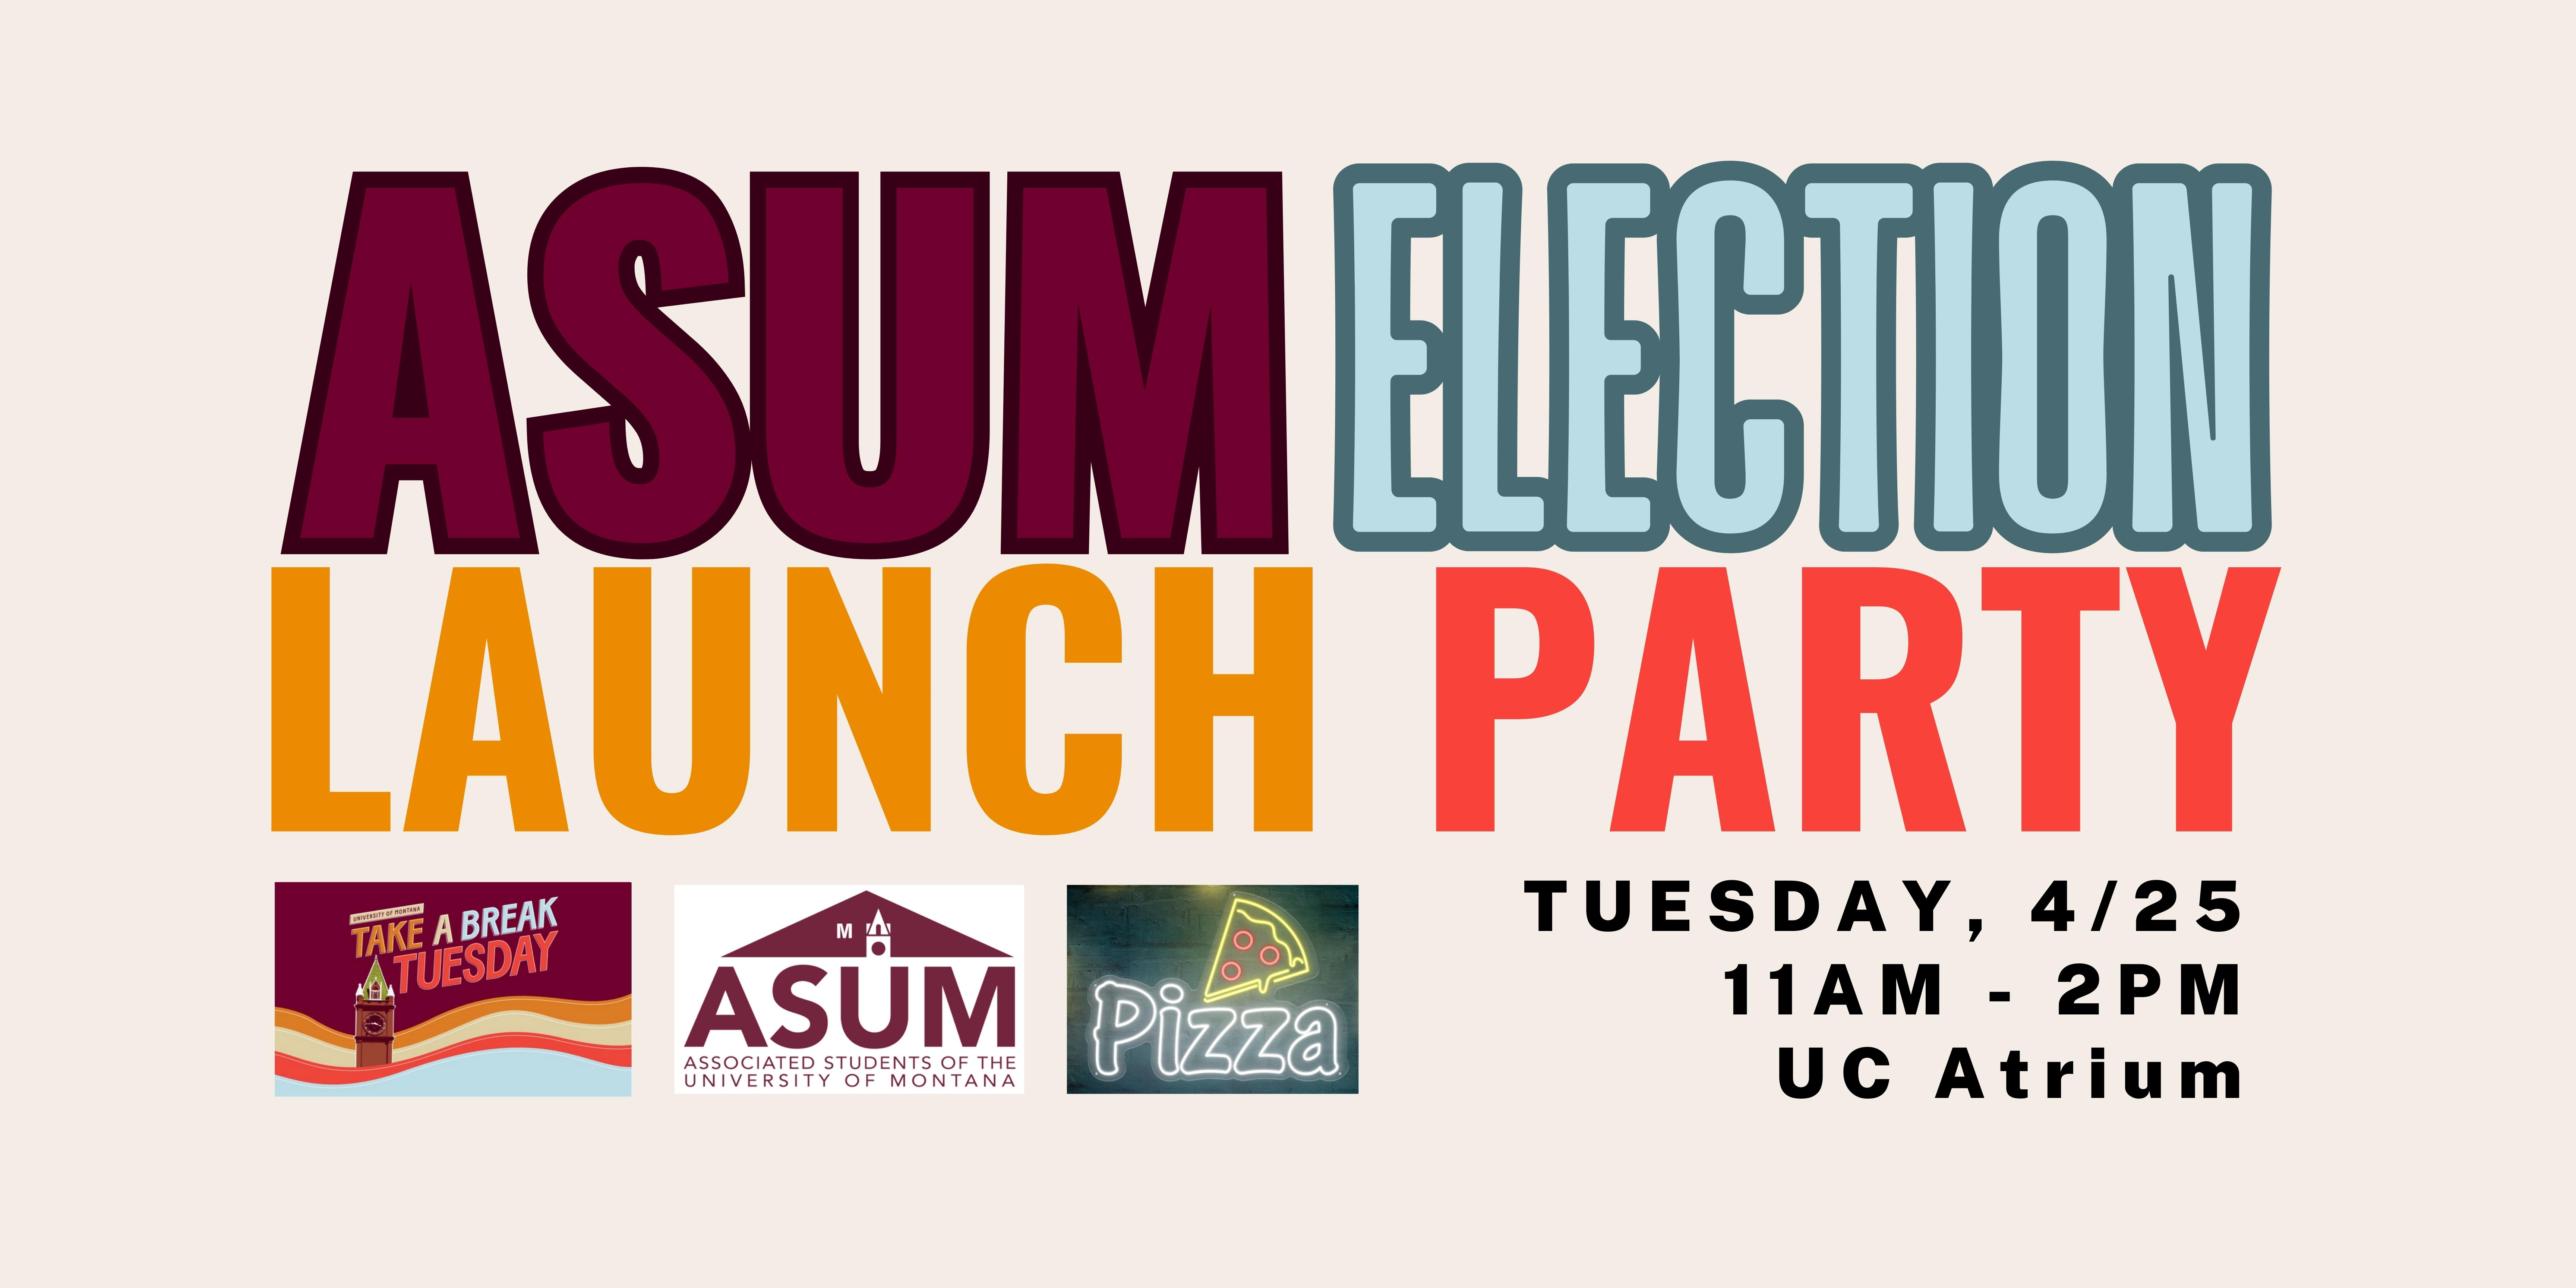 election lunch party poster with detials - Links to Griz Hub Event. 